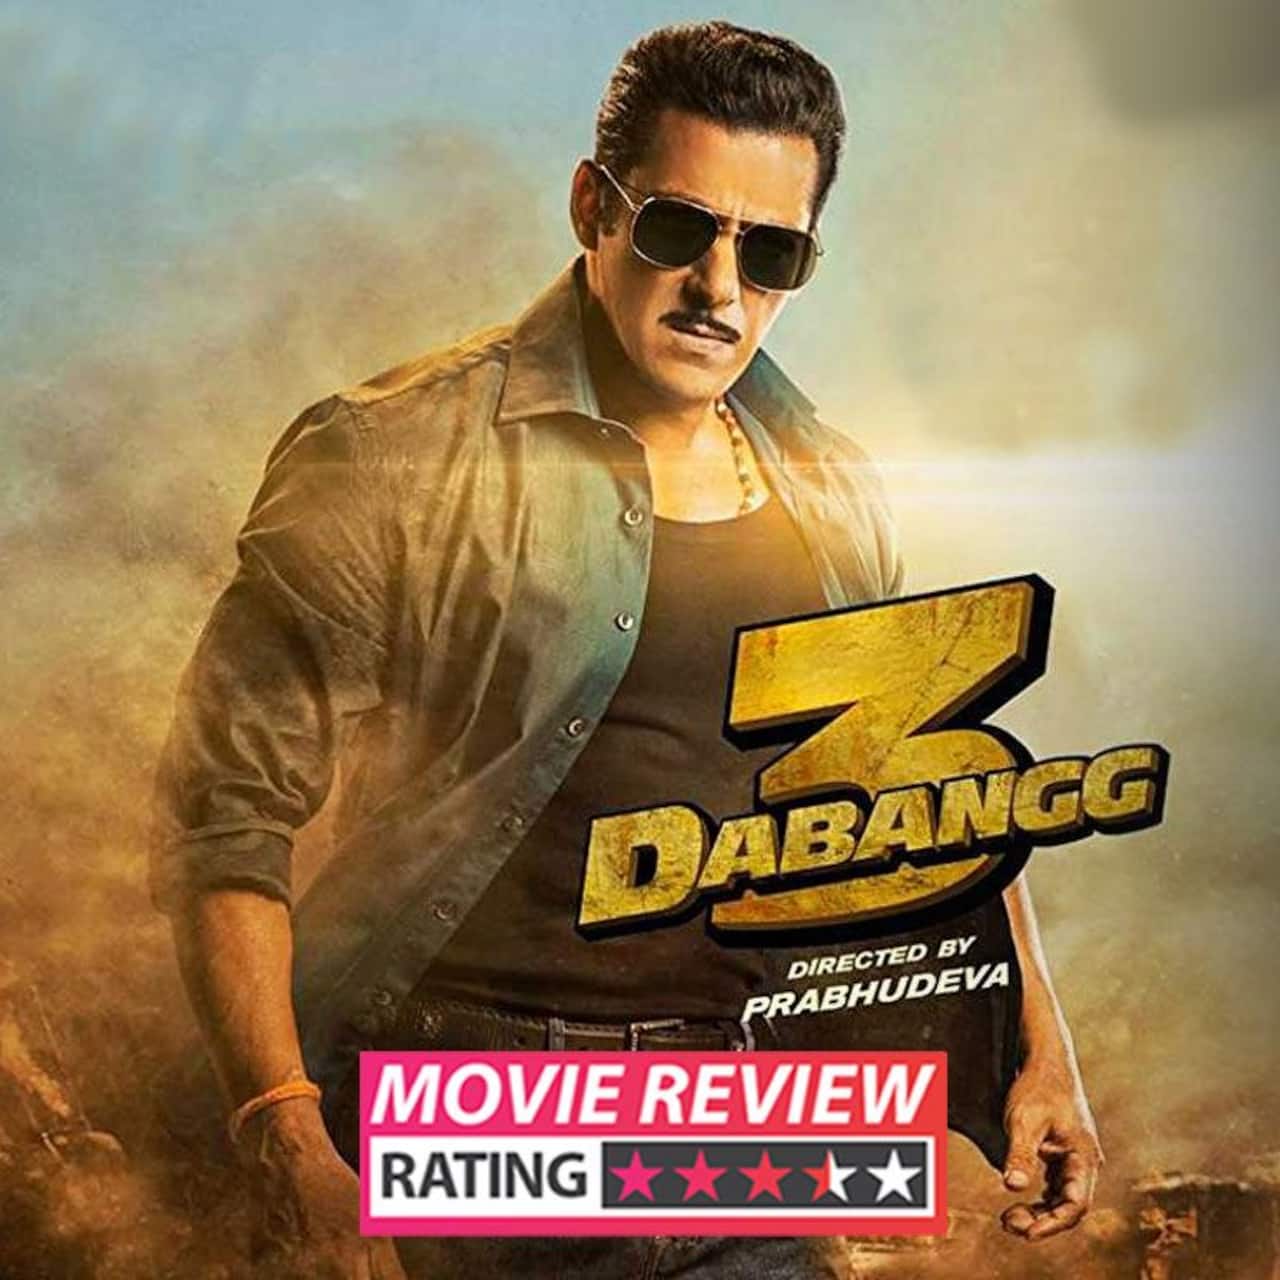 Dabangg 3 movie review: Salman Khan aka Chulbul Pandey is unstoppable in the massy entertainer of the year